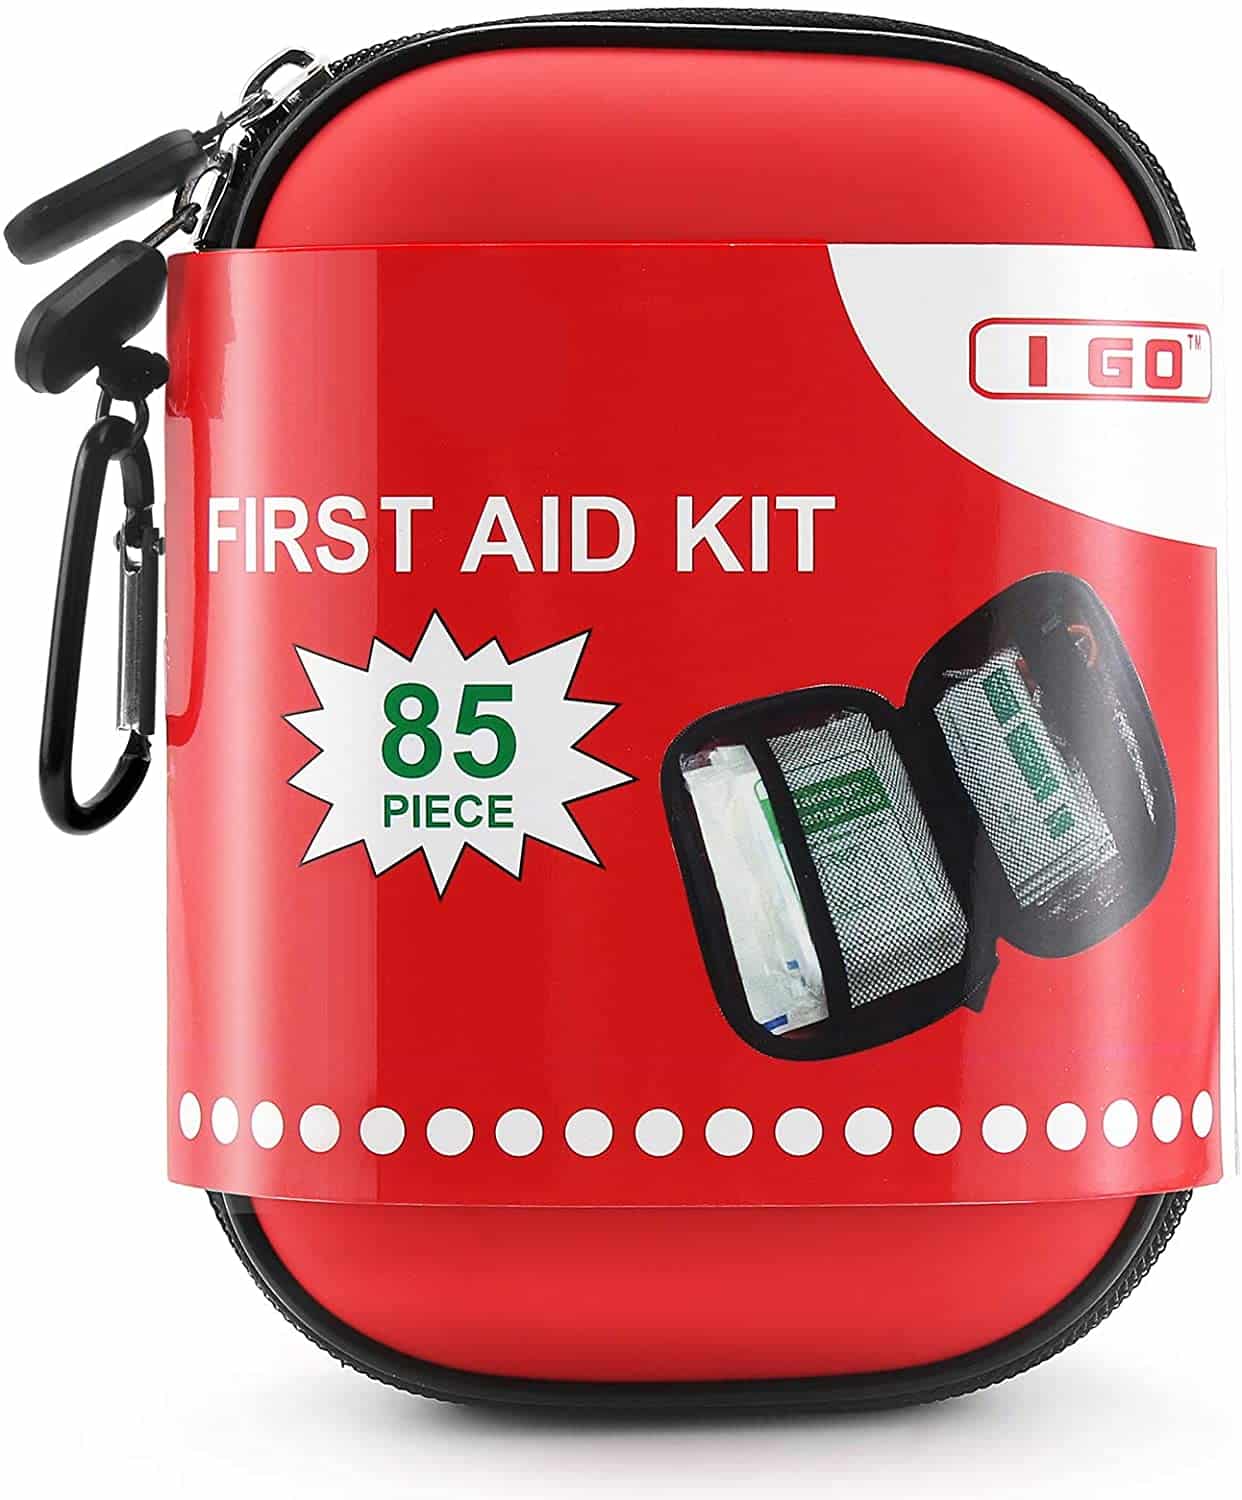 Hard Shell Compact First Aid Kit